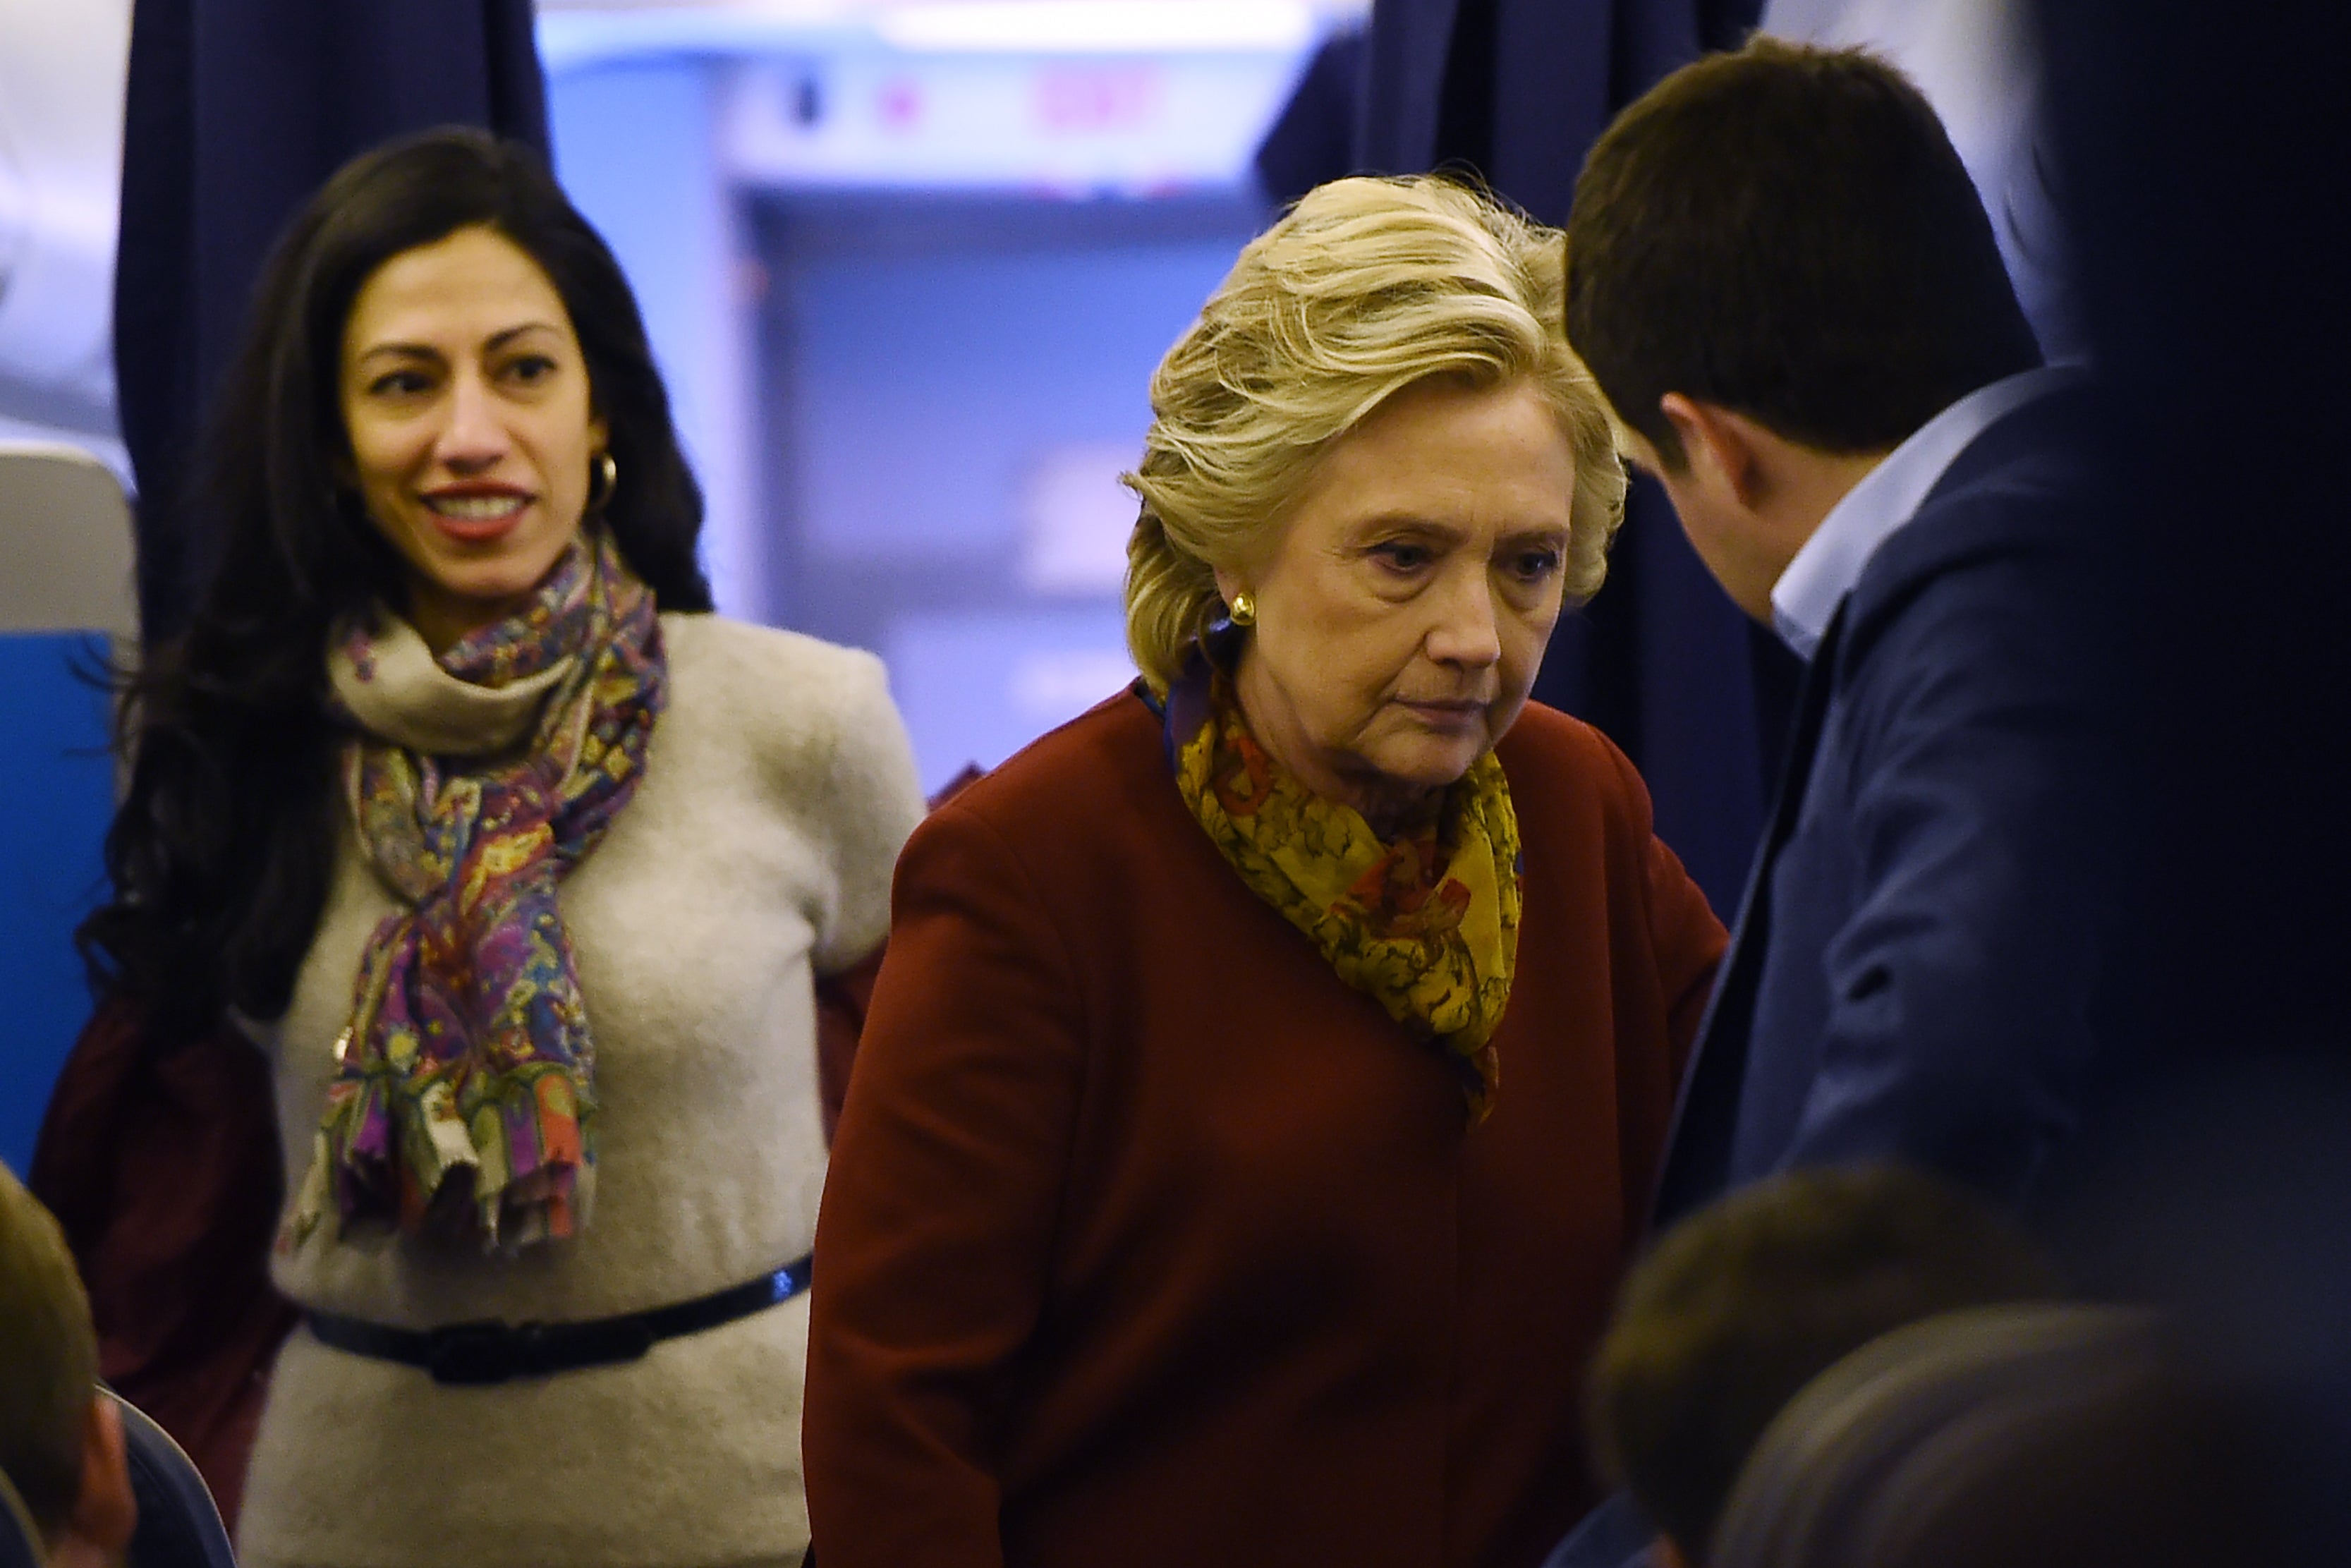 Democratic presidential nominee Hillary Clinton chats with her staff, including aide Huma Abedin (L), onboard her plane in White Plains, New York, October 22, 2016, on her way to a campaign event in Pittsburgh, Pennsylvania.